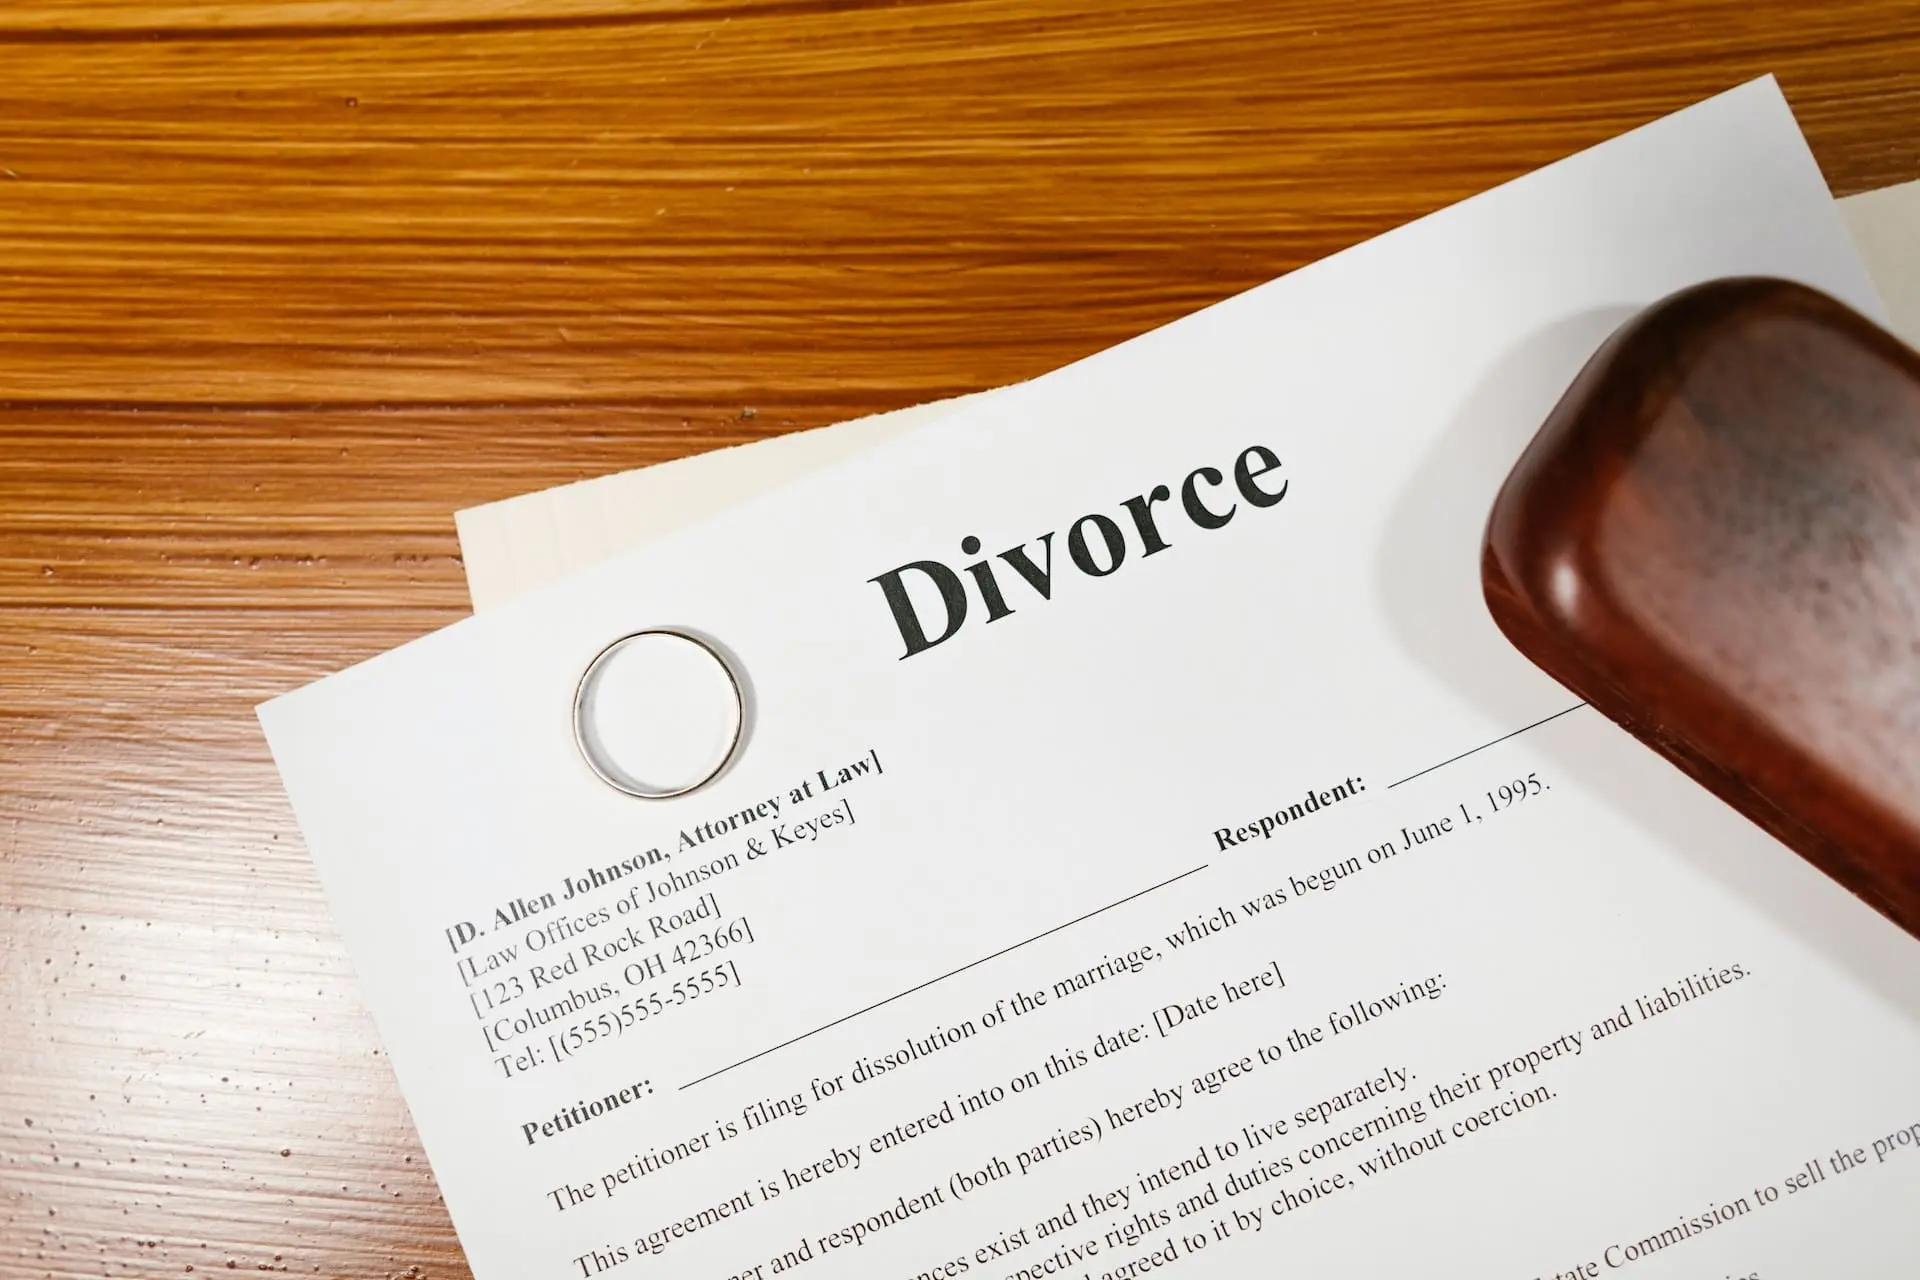 What are the required divorce papers in India?